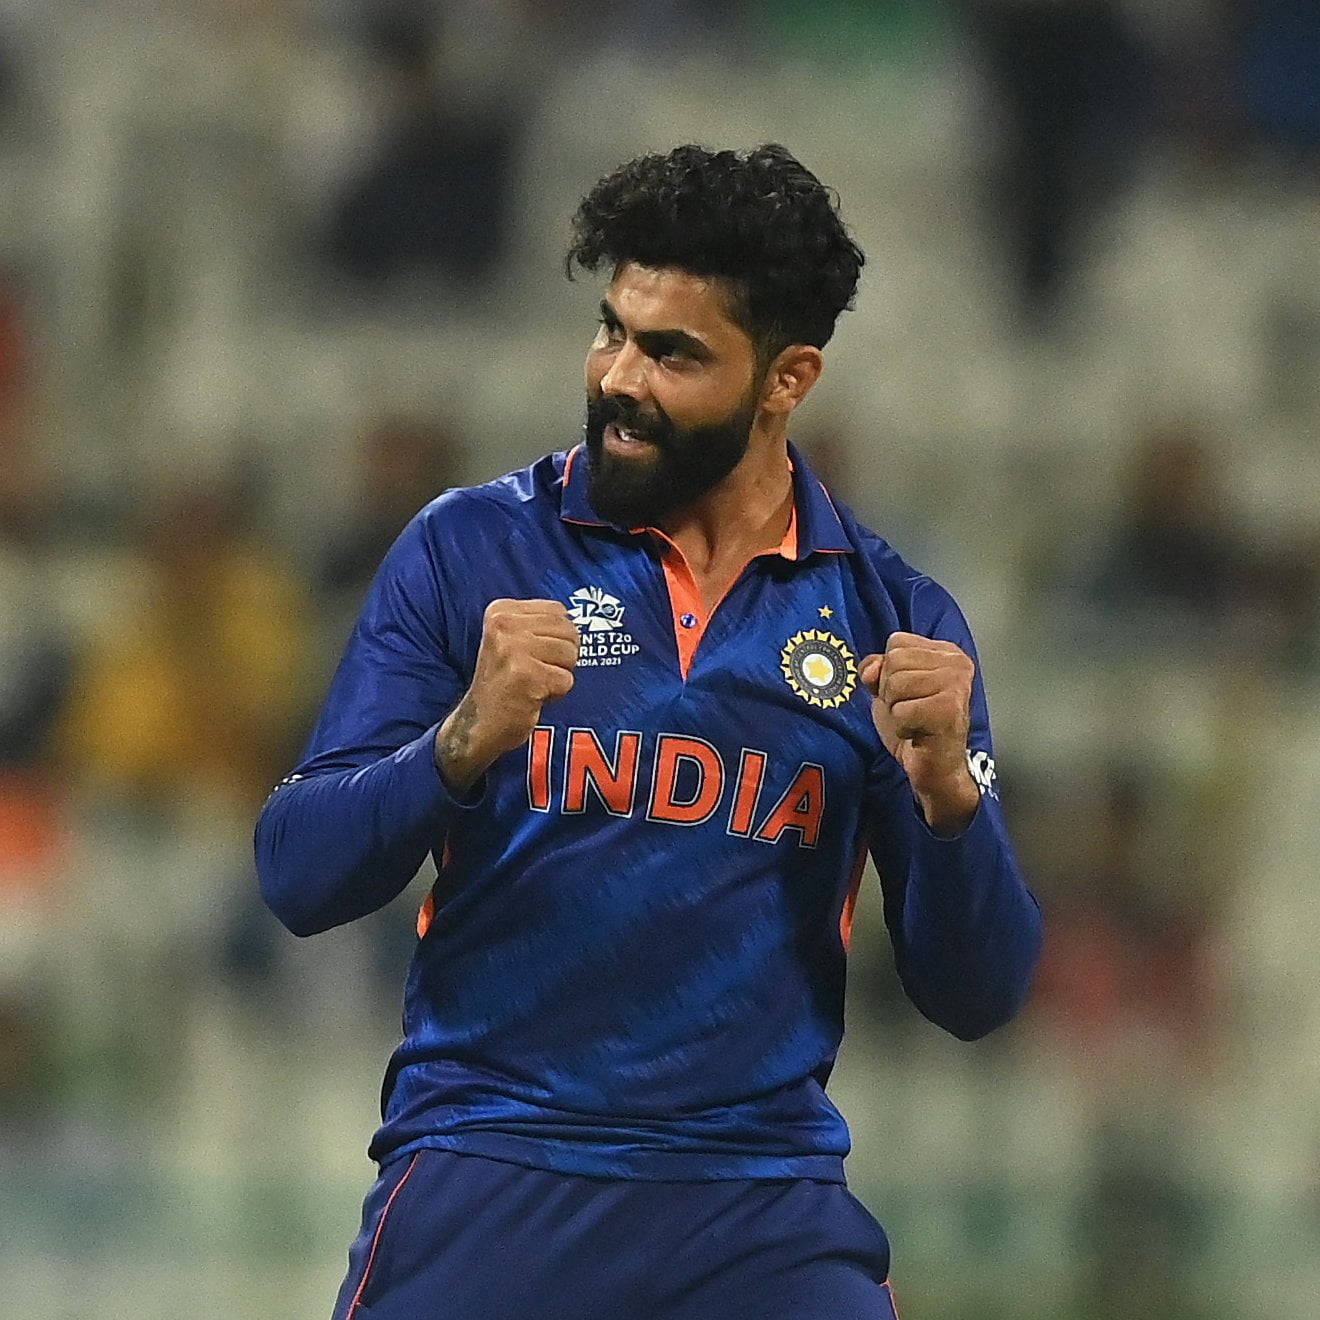 Ravindra Jadeja With Clenched Fists